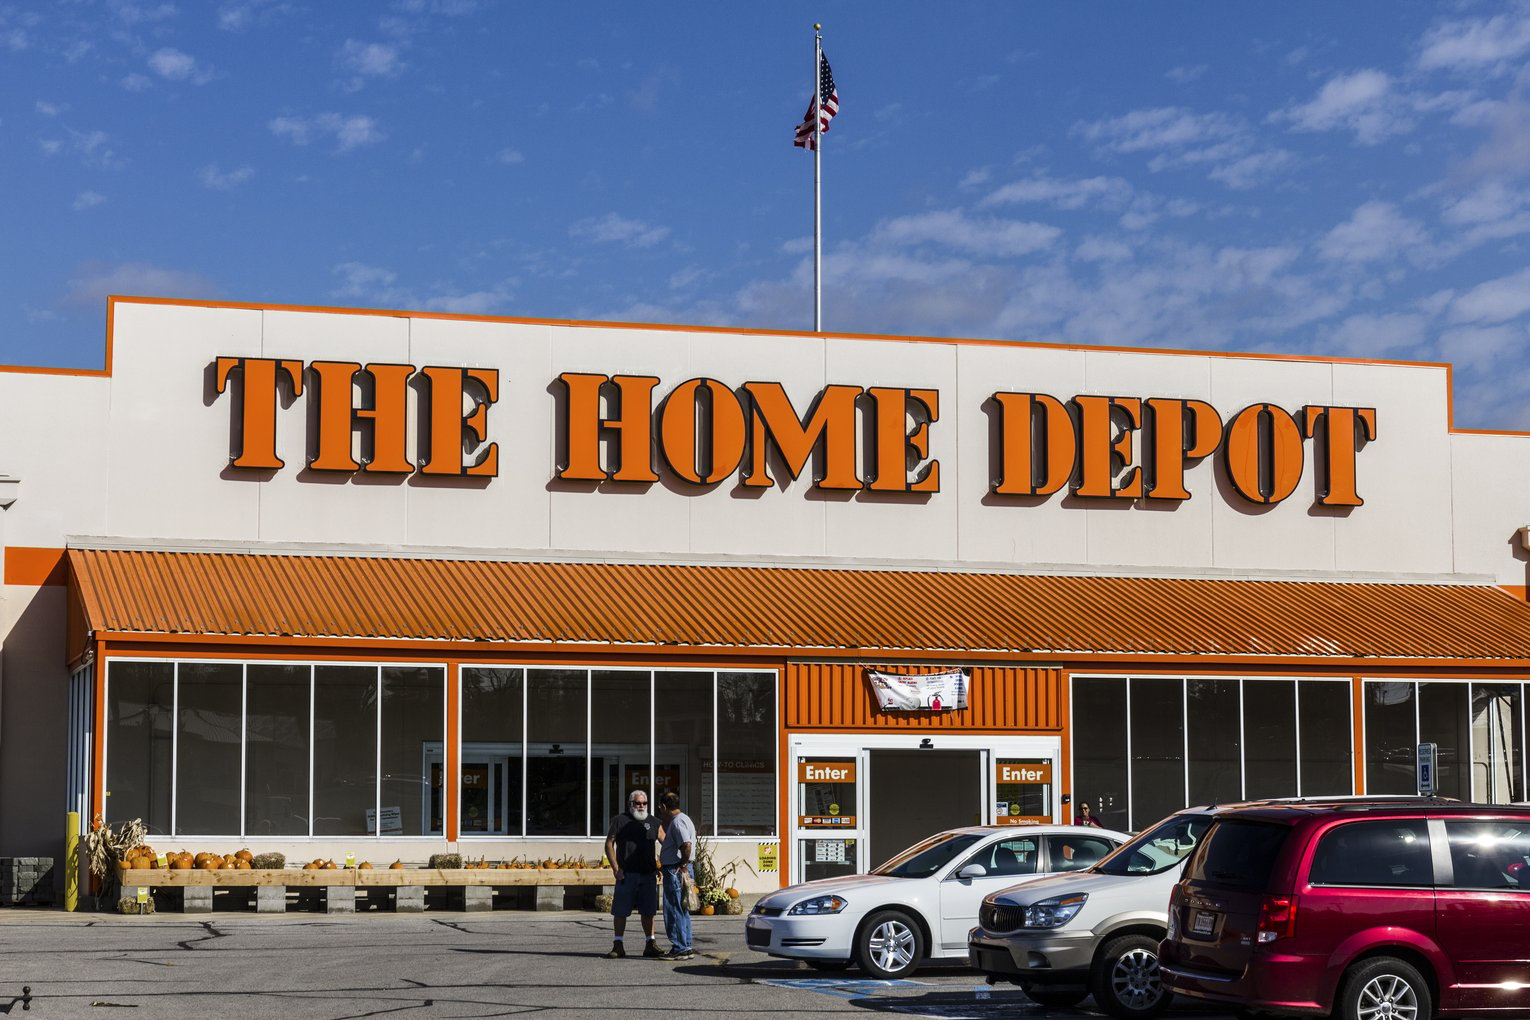 5. Take a class at Home Depot.